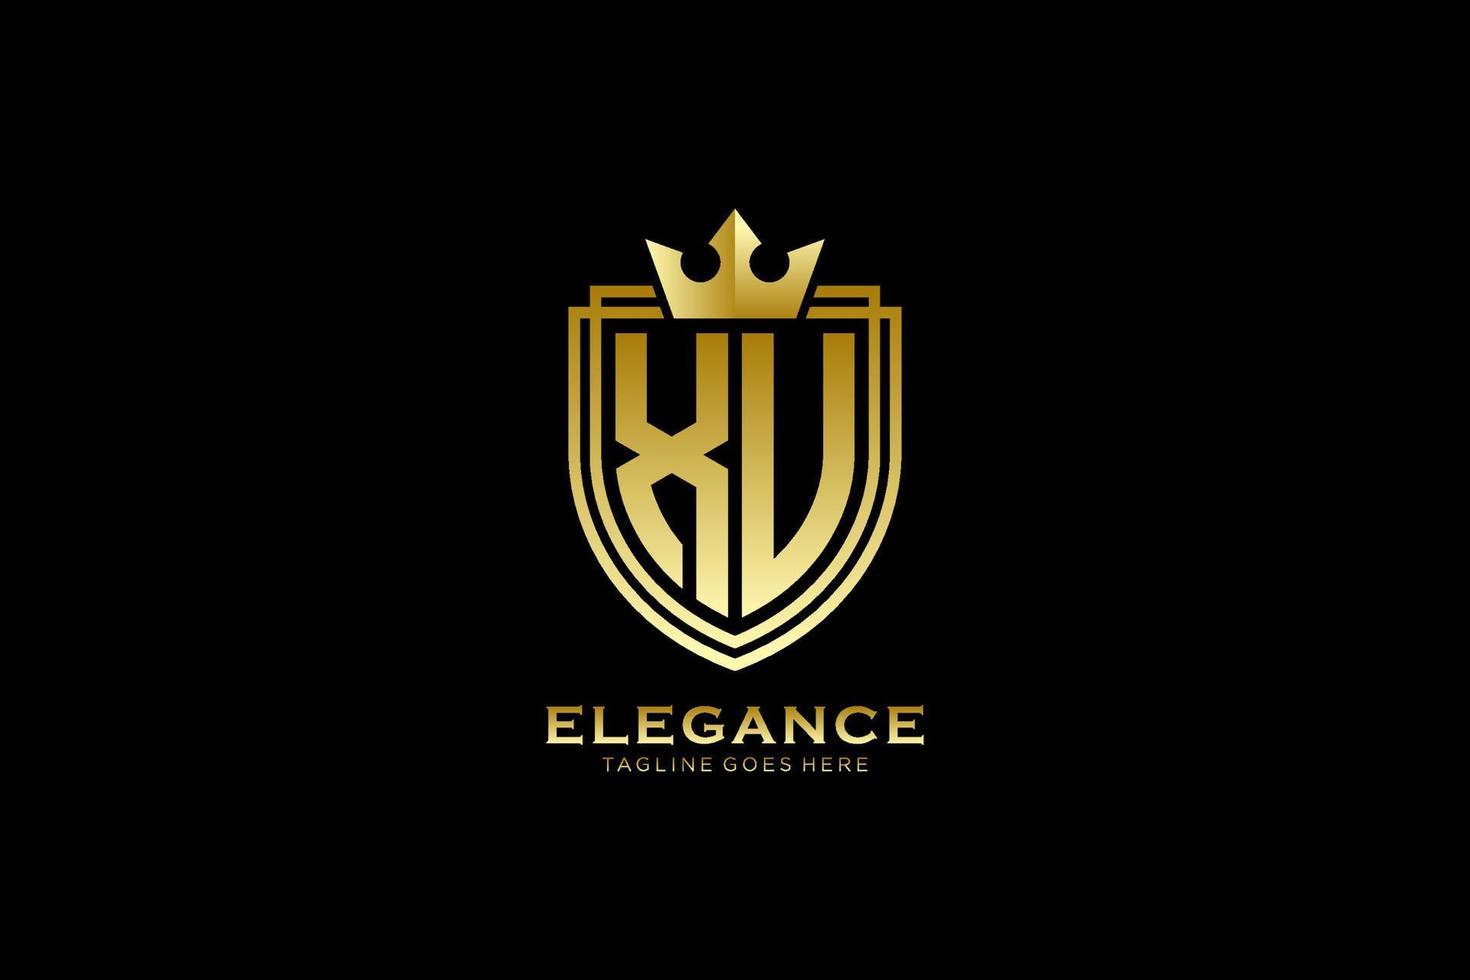 initial XU elegant luxury monogram logo or badge template with scrolls and royal crown - perfect for luxurious branding projects vector